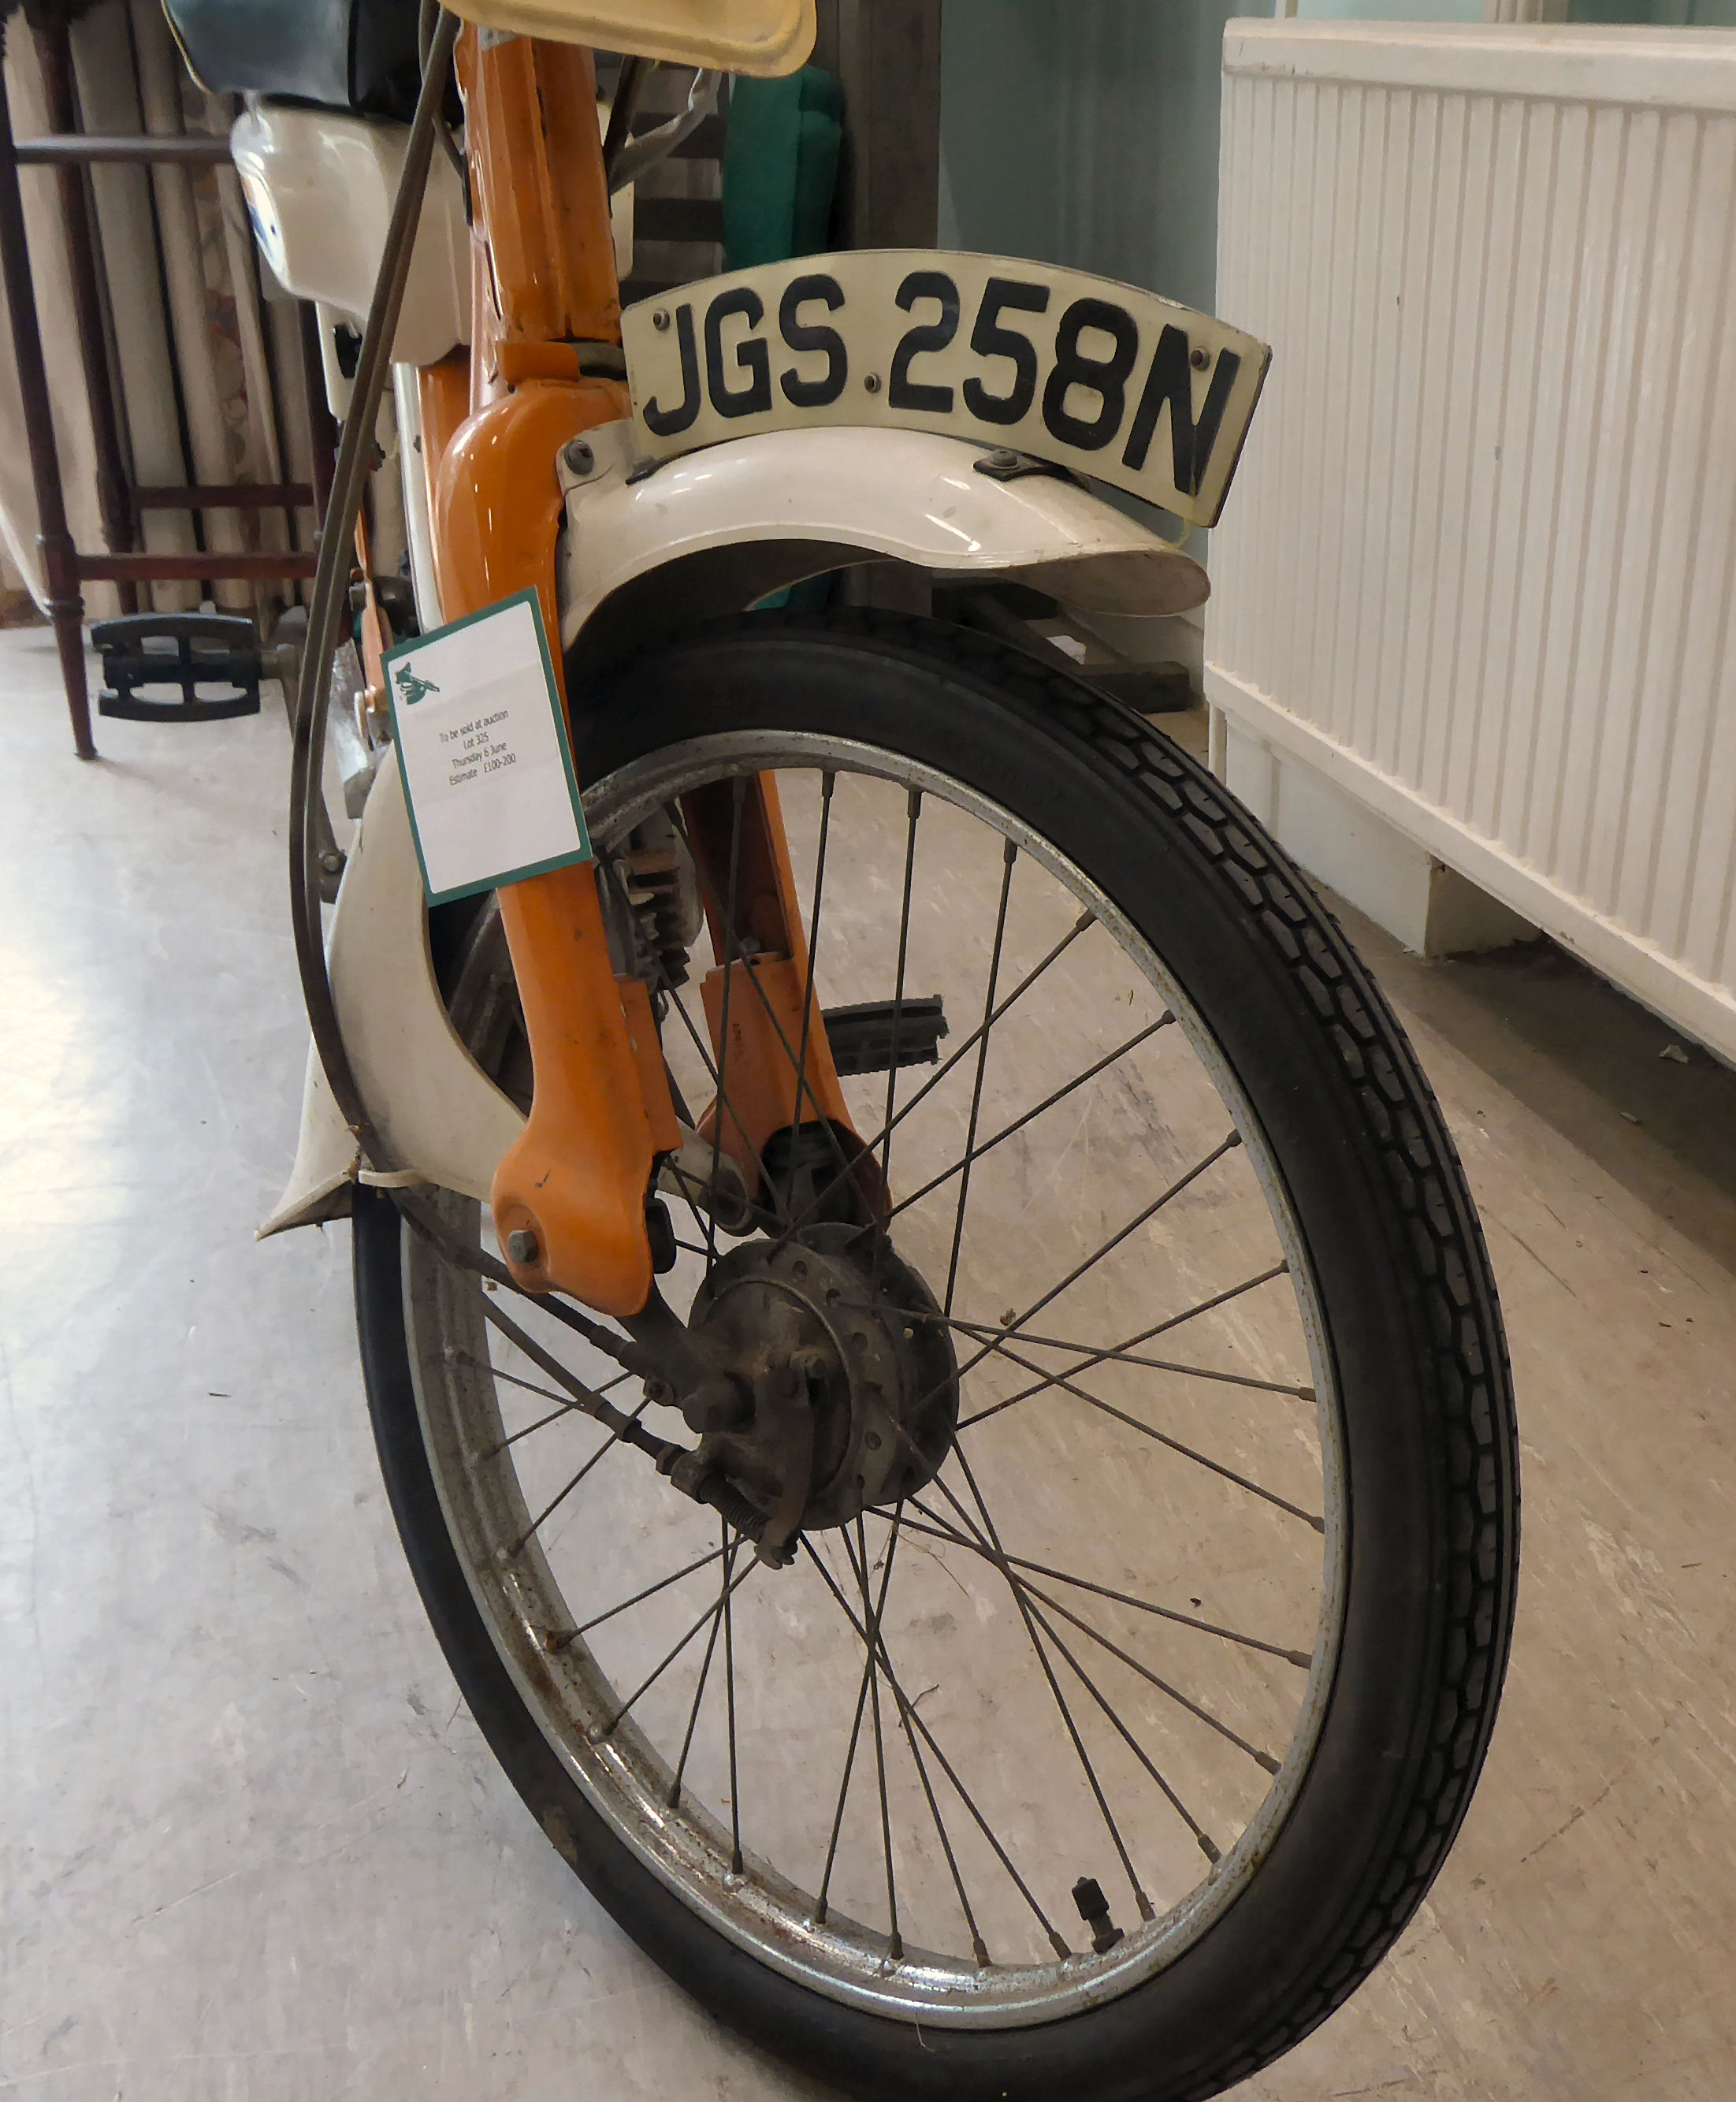 A 1975 Honda 49cc moped in orange and white livery, original registration plates for JGS 258N but no - Image 7 of 12